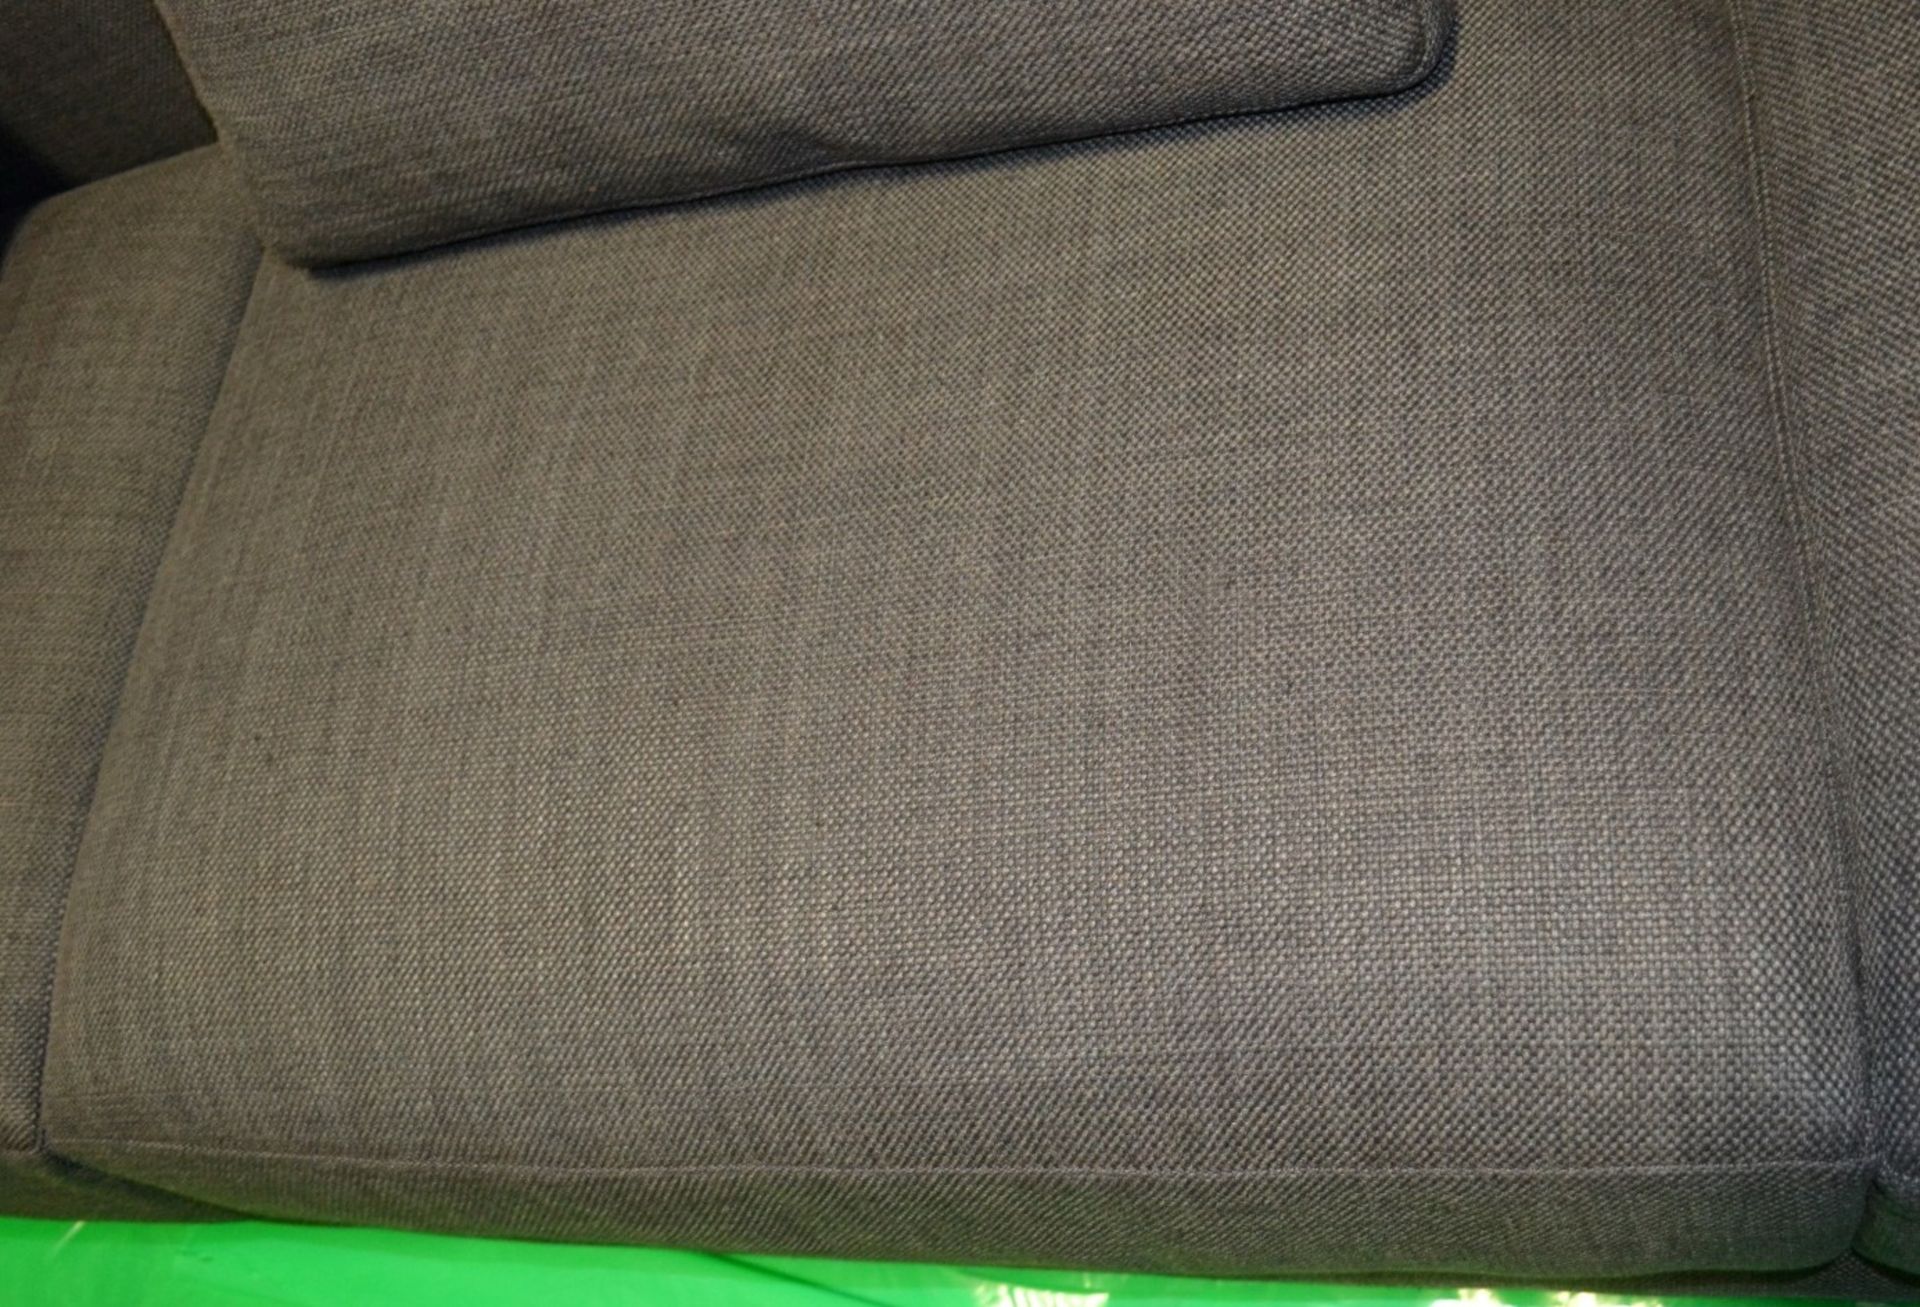 1 x Large B&B Italia "Luis" Sofa - 2.8 Metres Wide - Richly Upholstered In A Grey/Blue Fabric - - Image 2 of 5